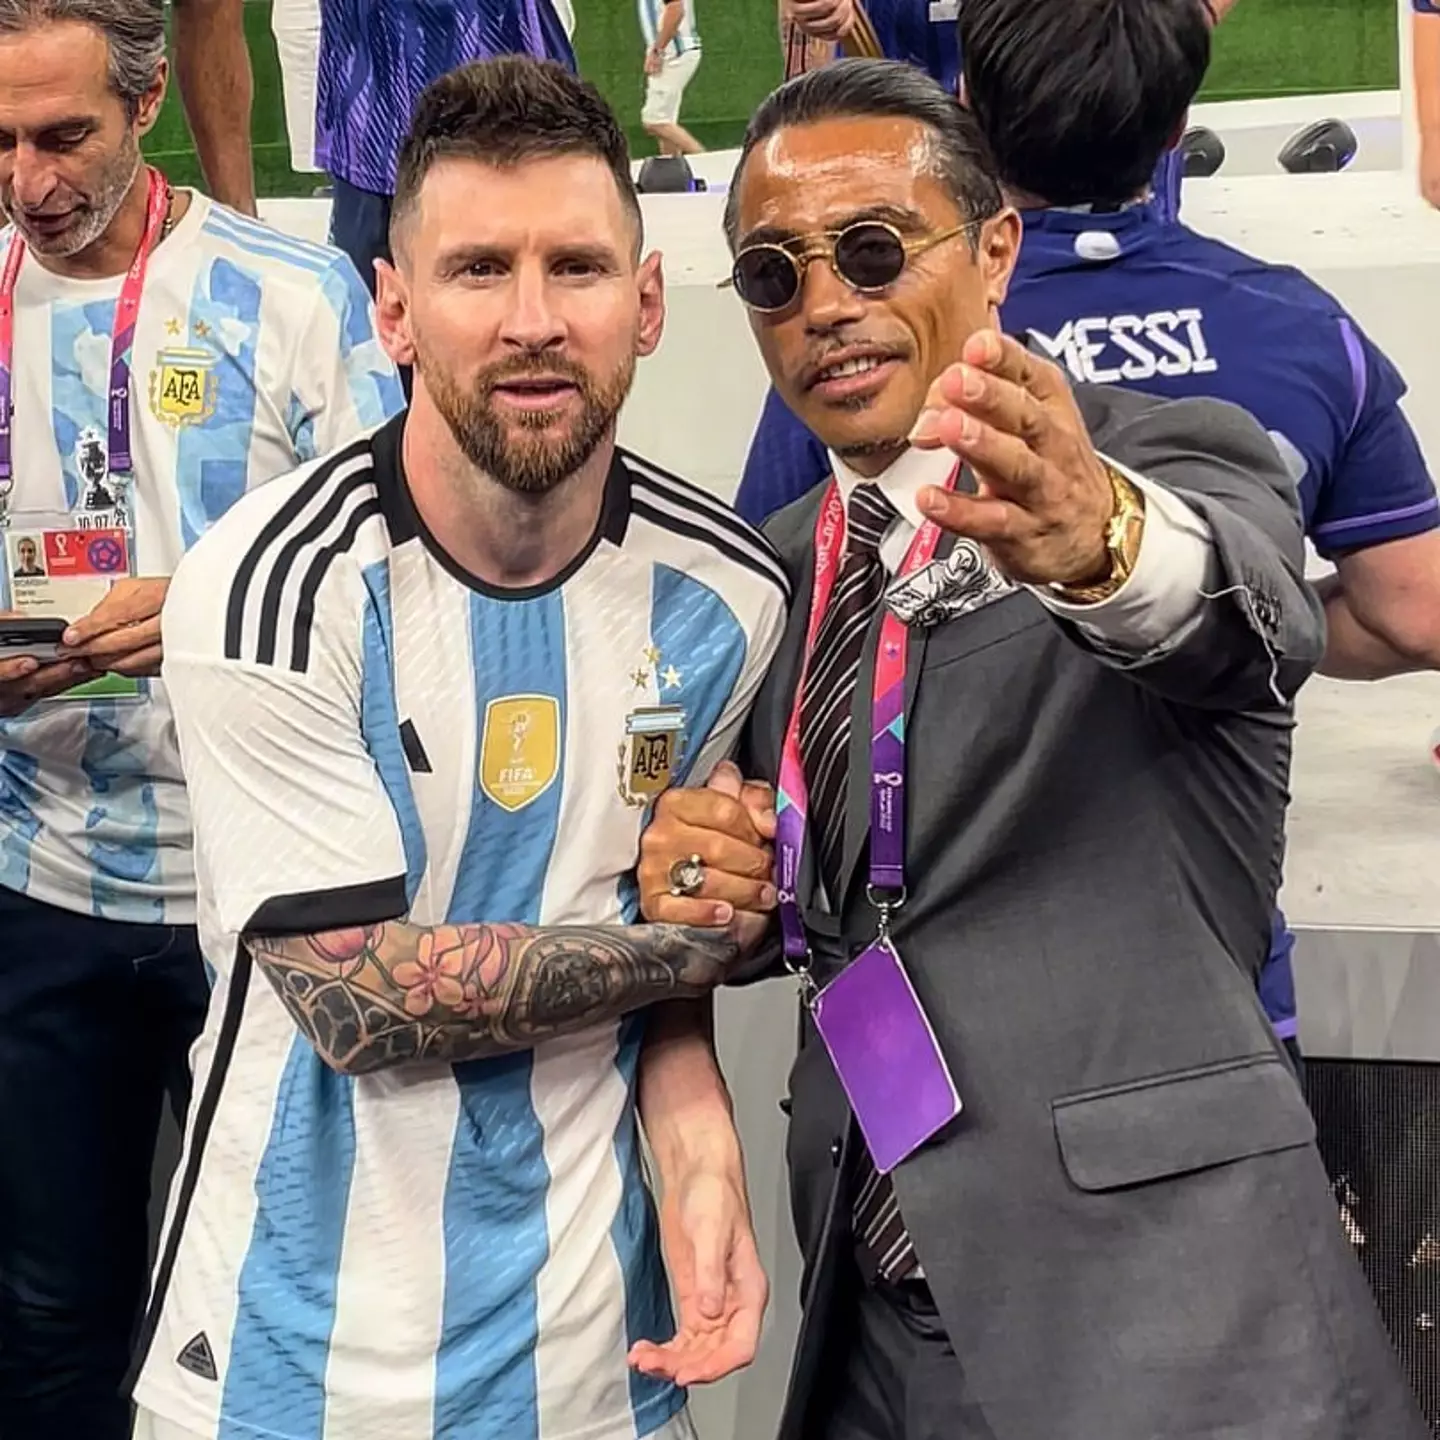 Salt Bae did eventually get to share a selfie with Lionel Messi.